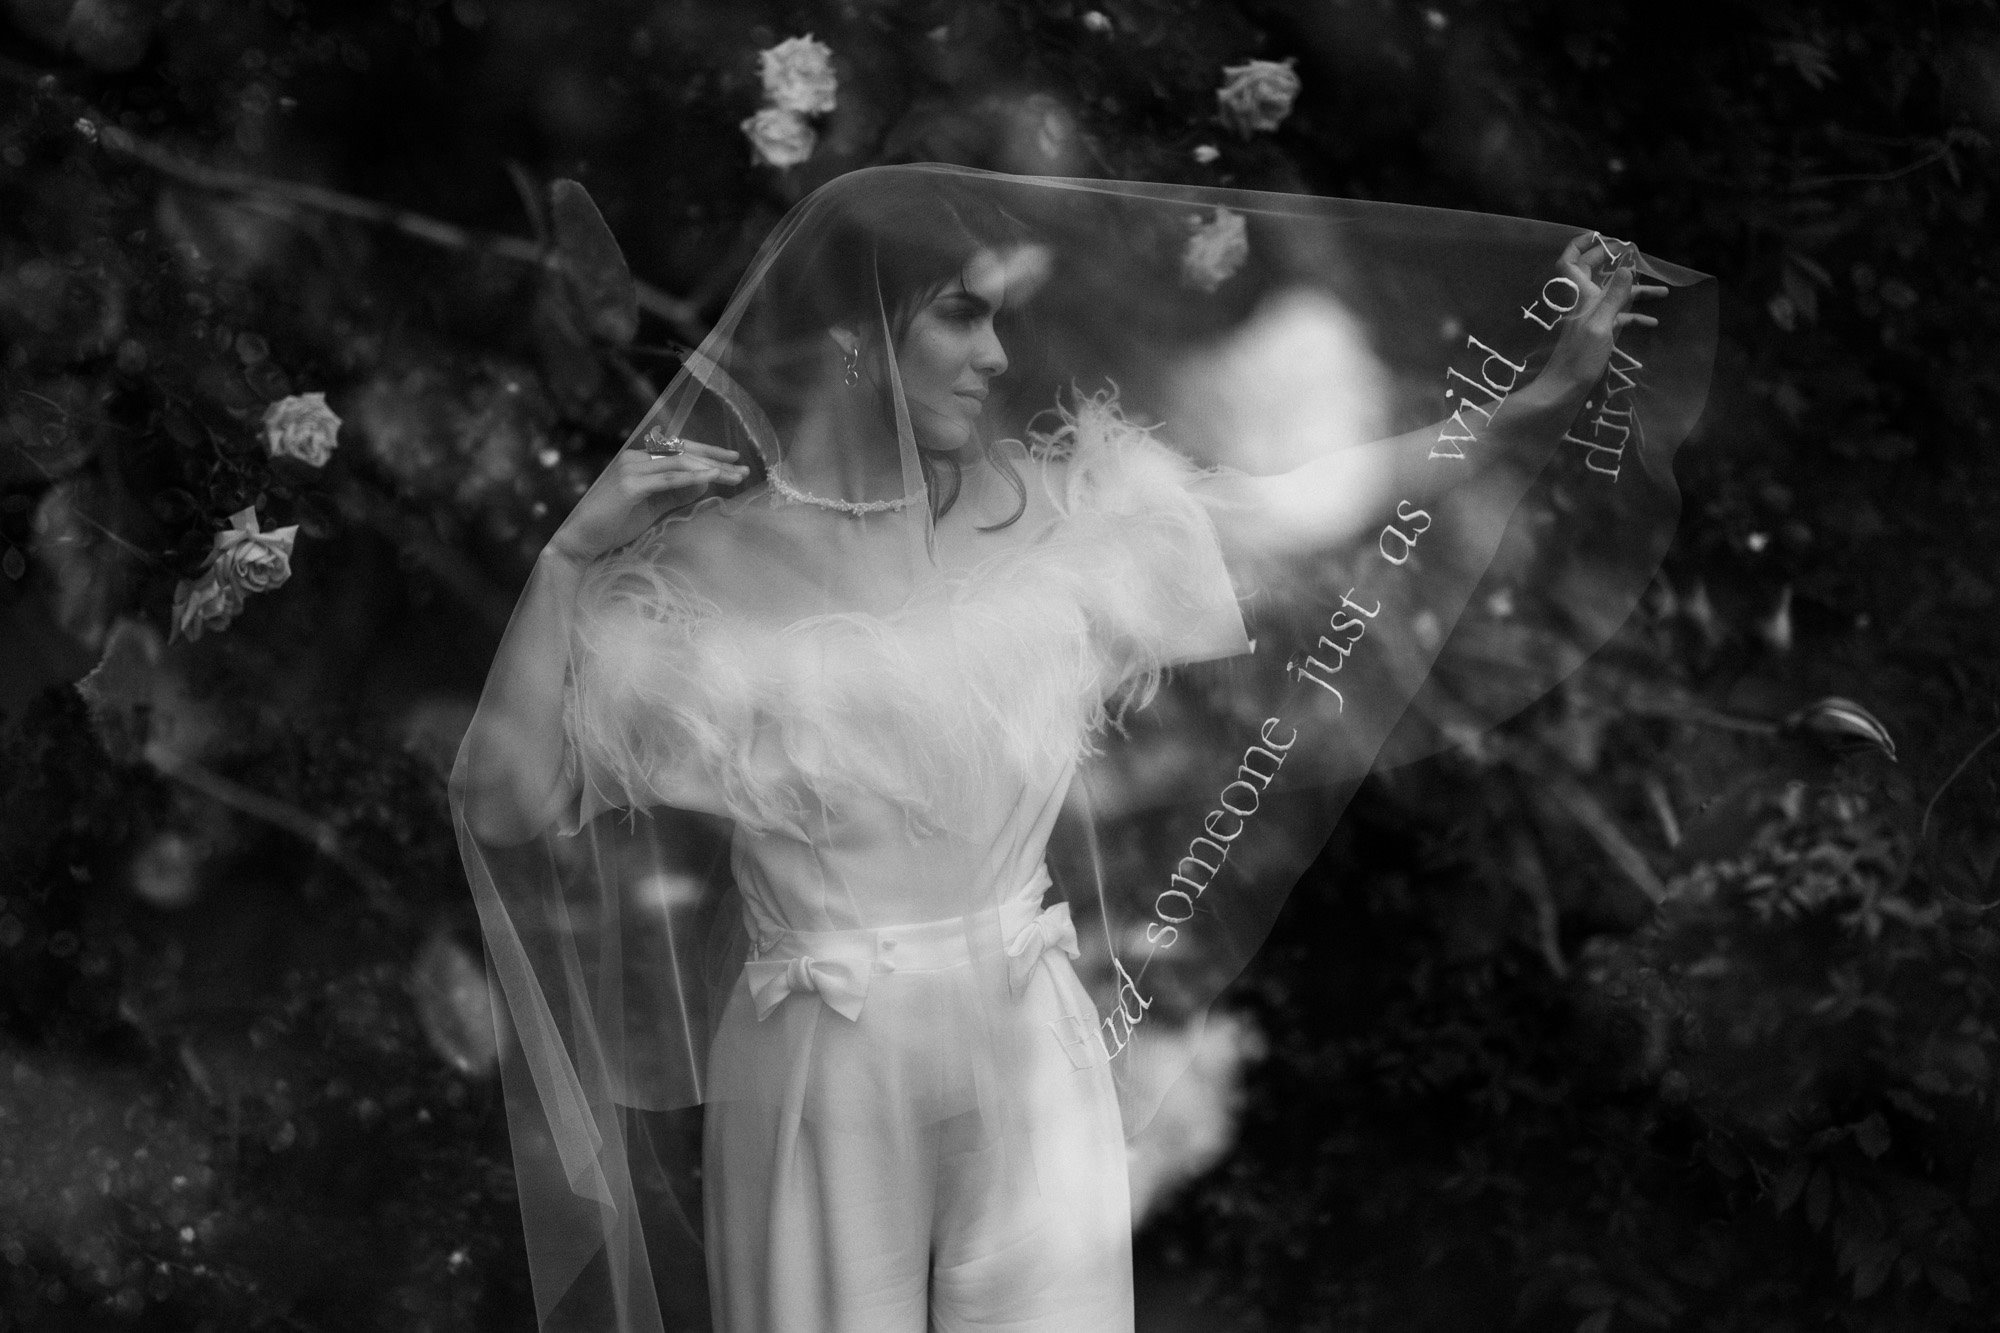 Modern chic wild bride underneath veil with writing wearing pearl necklace and feather jumpsuit in moody black and white shot